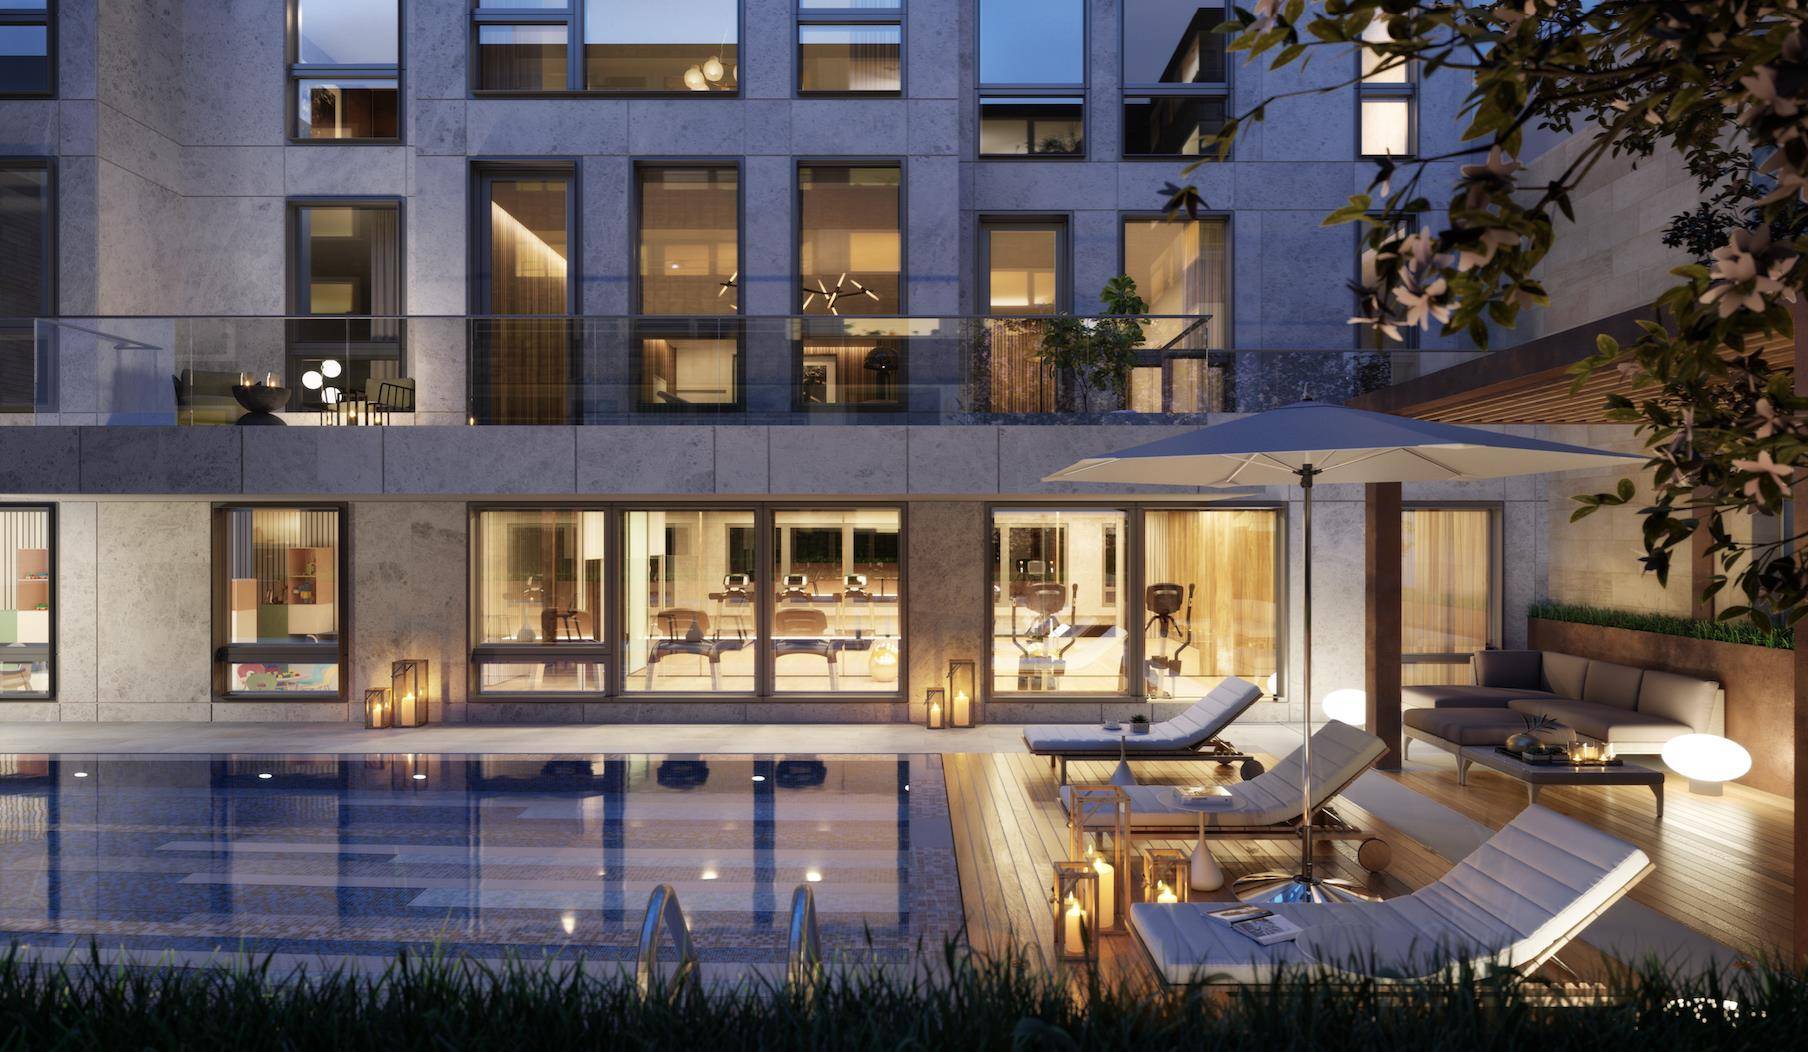 A one of a kind opportunity to enjoy luxurious living in Gramercy matched with ultimate privacy.